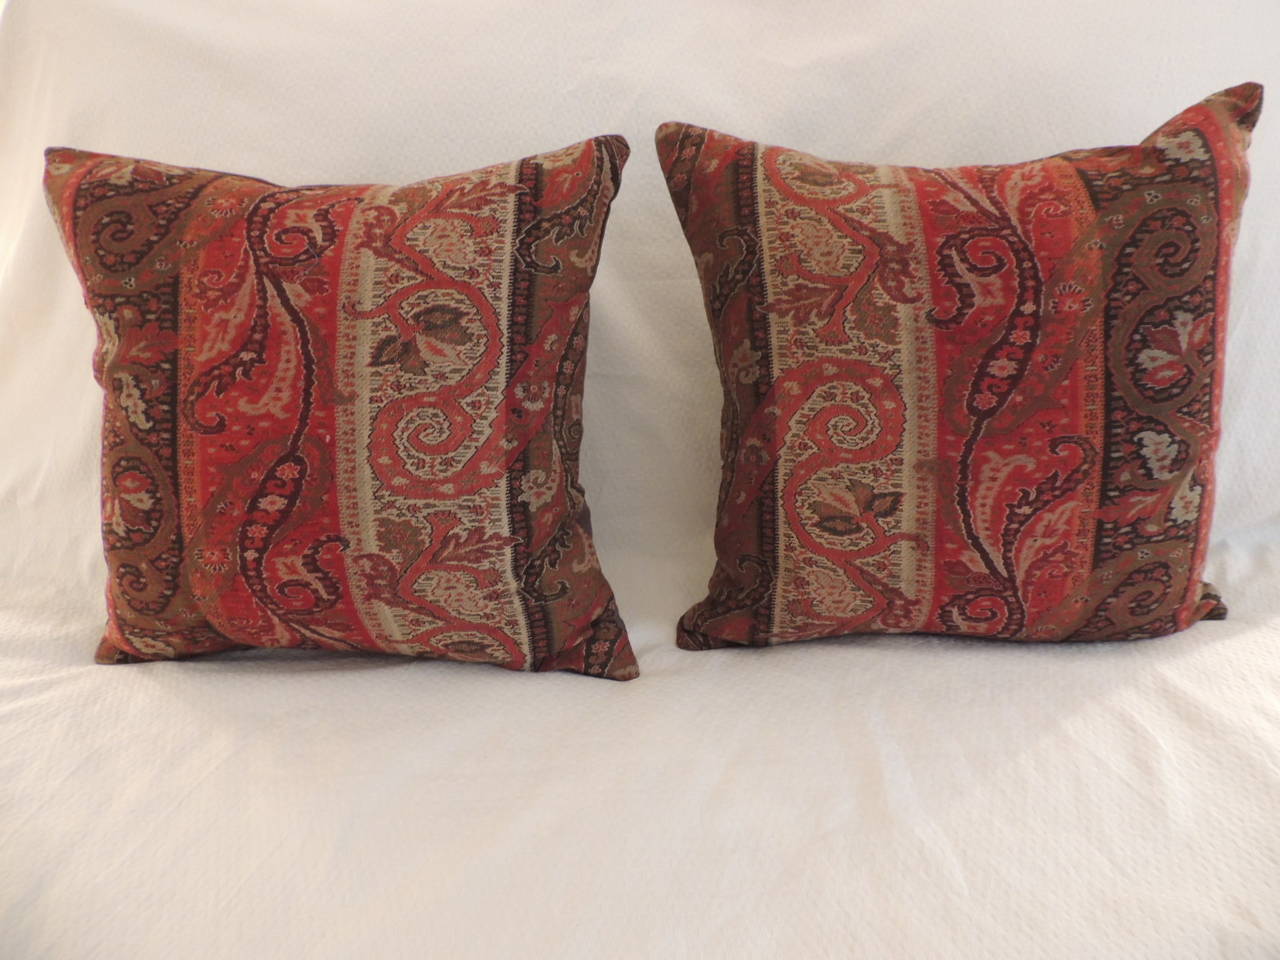 Pair of antique textile stripe paisley Kashmir decorative pillows handcrafted from a shawl texture wool and moss green linen backings. In shades of tan, red, green, black.  Kashmir handmade shawls’ are textiles handcrafted by artisans with fine wool